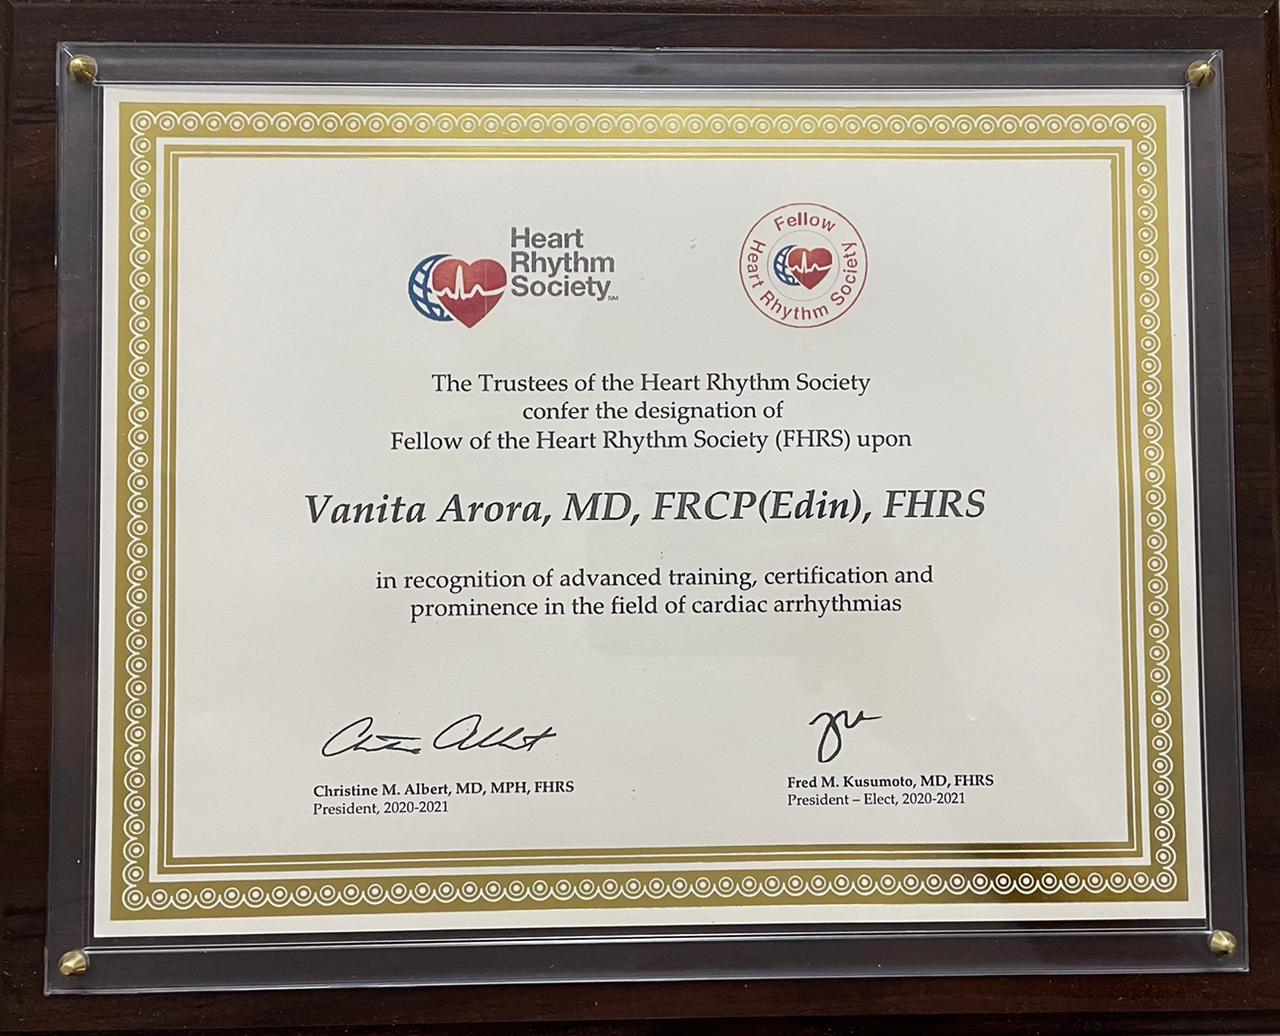 Honor of FHRS to best cardiologist